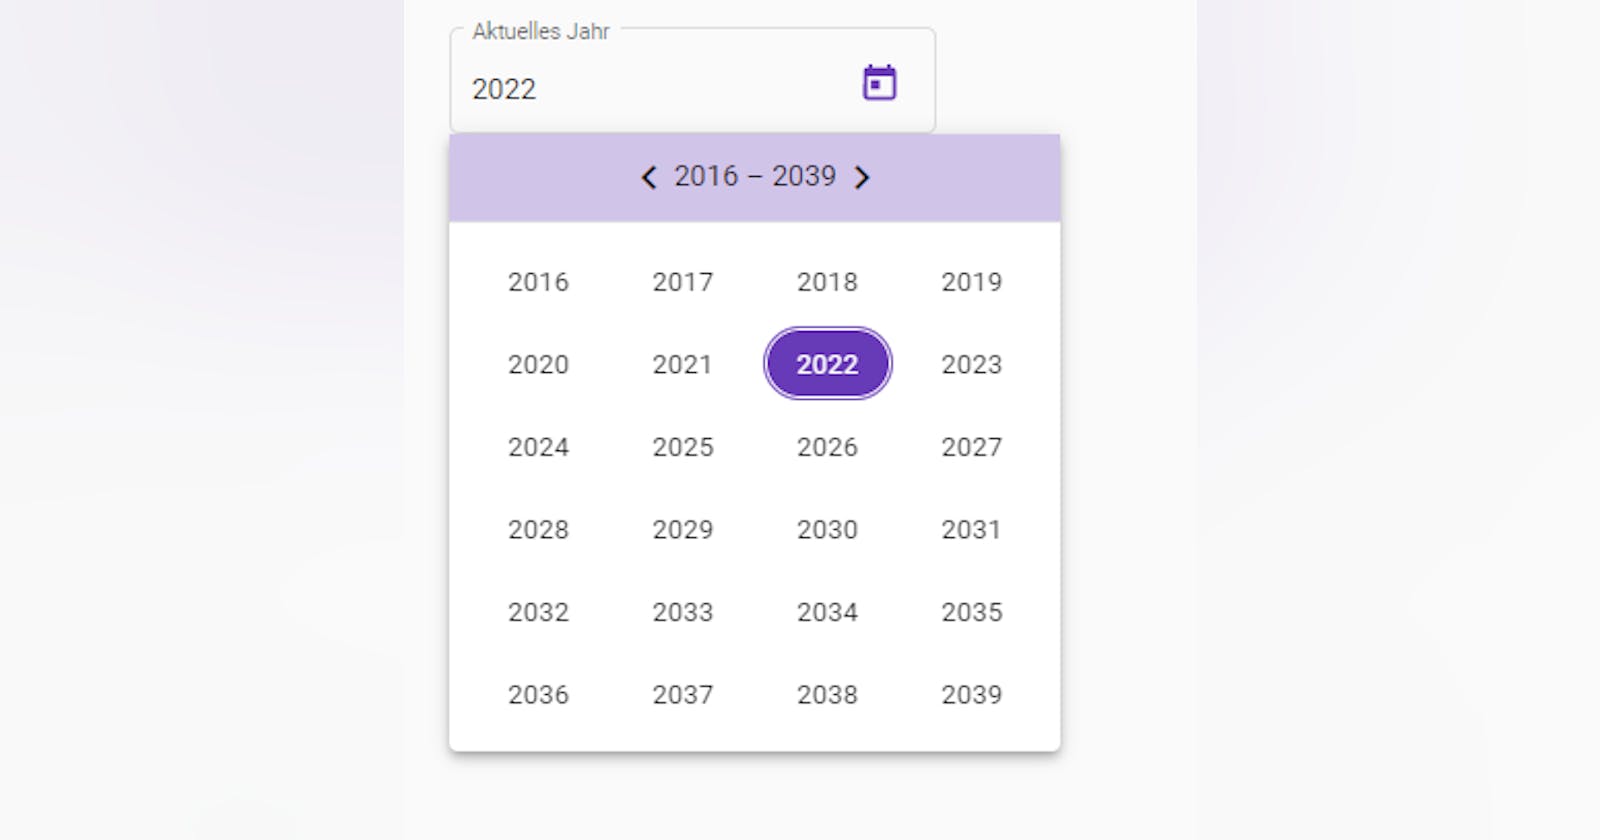 Creating an Angular Material YearPicker component out of an customized DatePicker component